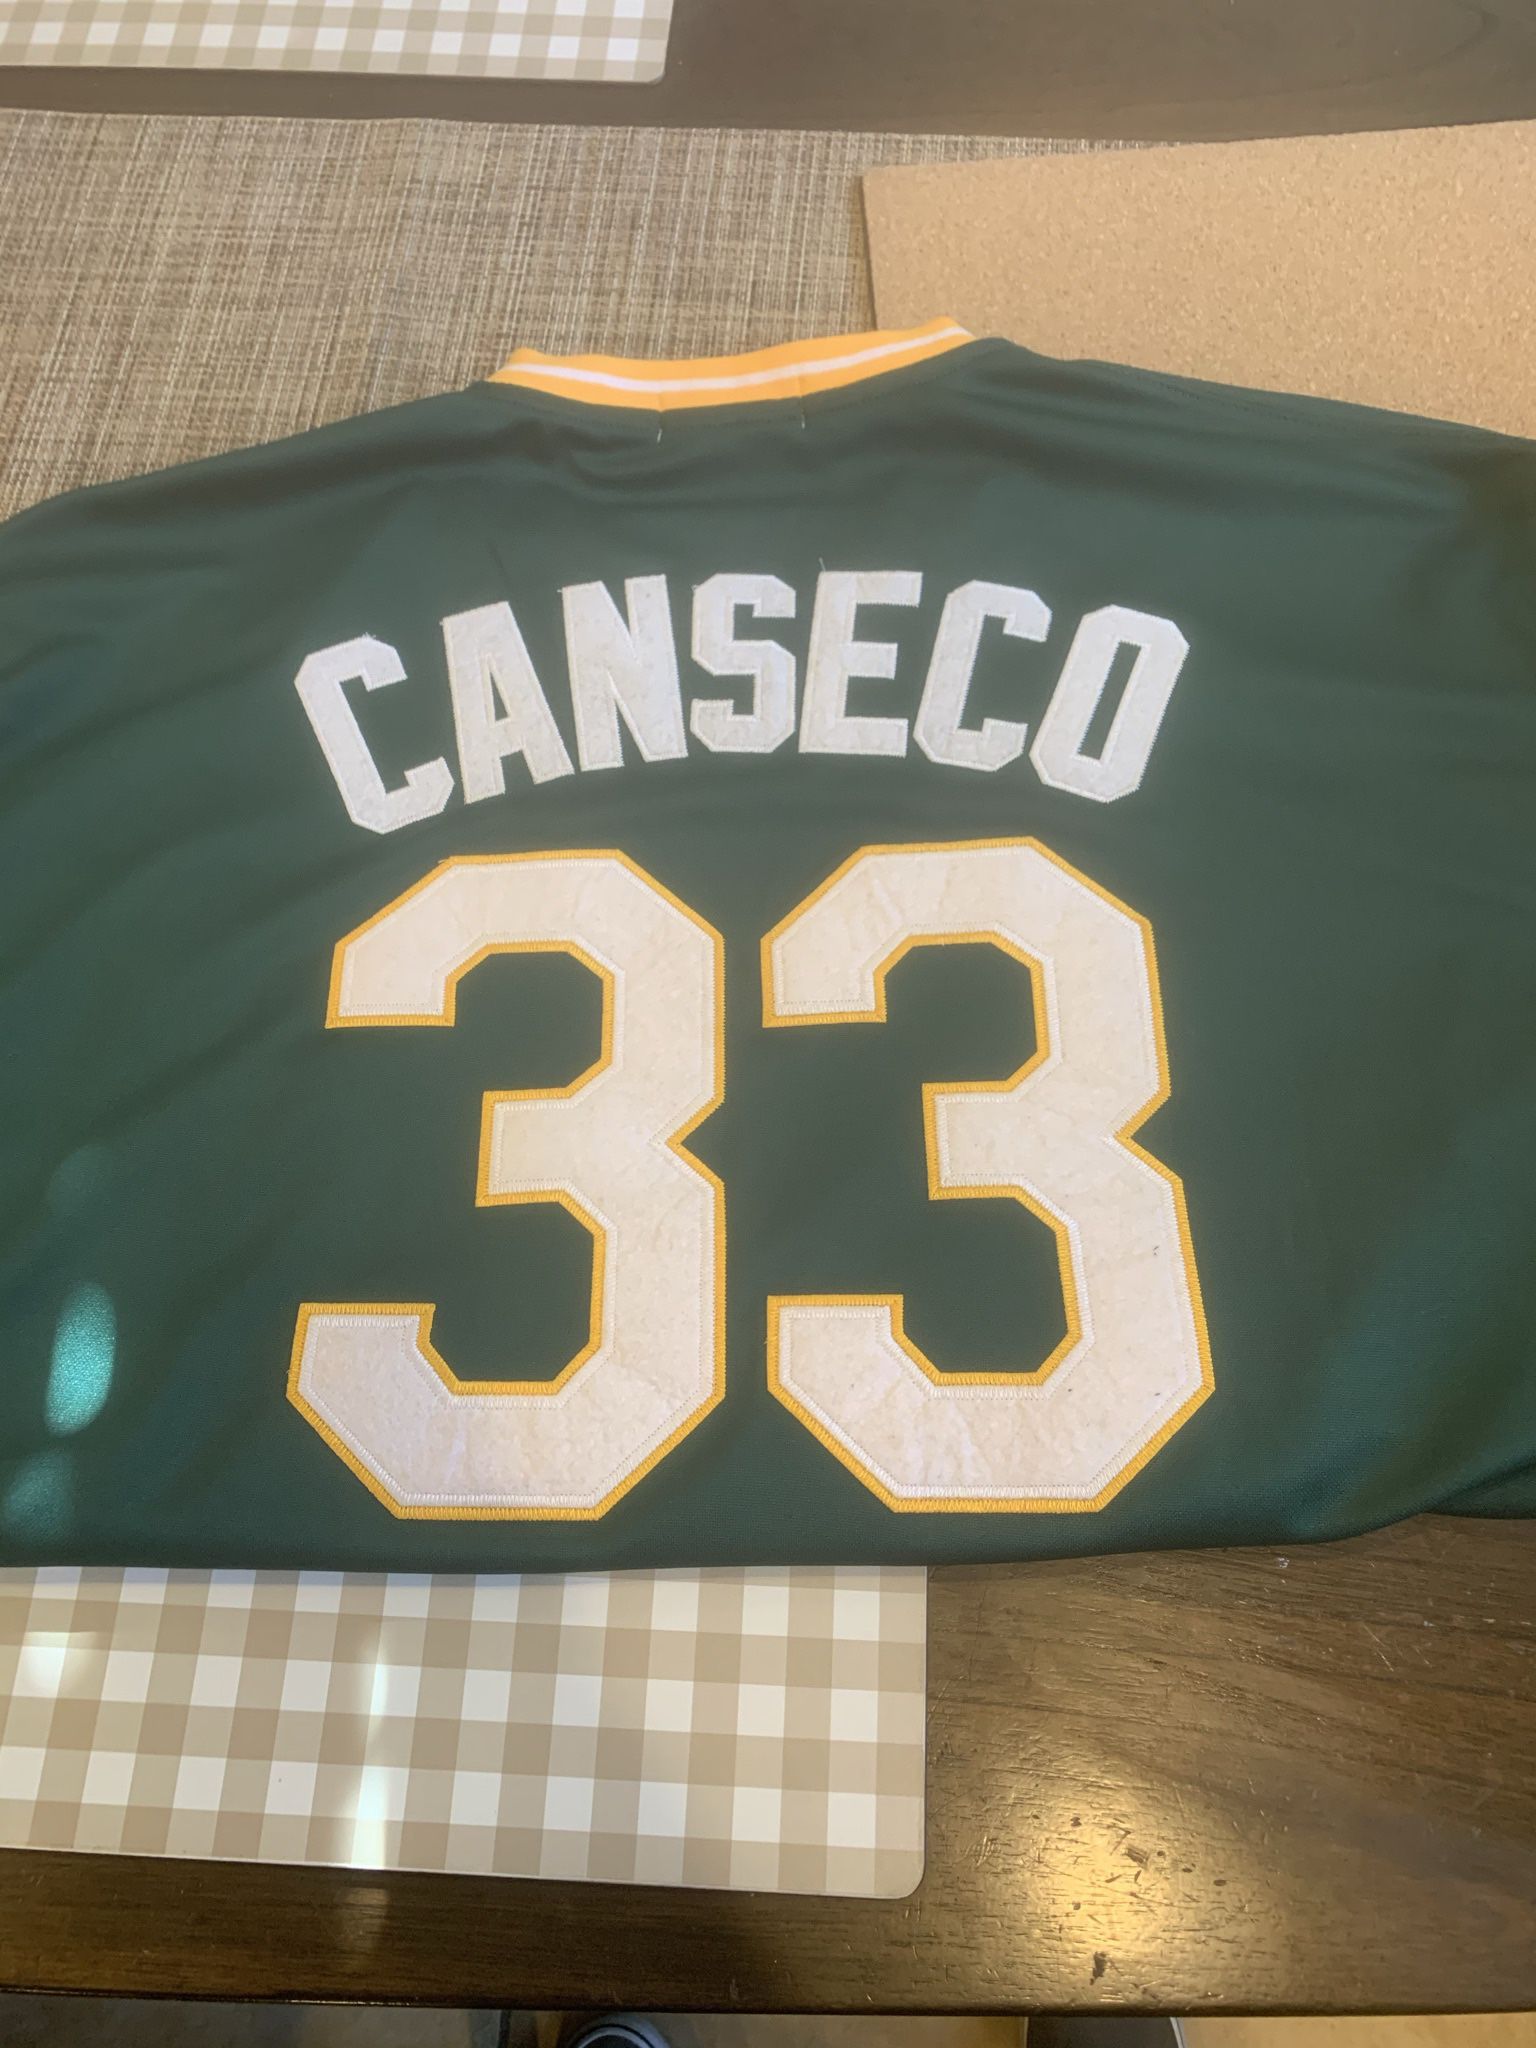 Jose Canseco Jersey for Sale in Tracy, CA - OfferUp